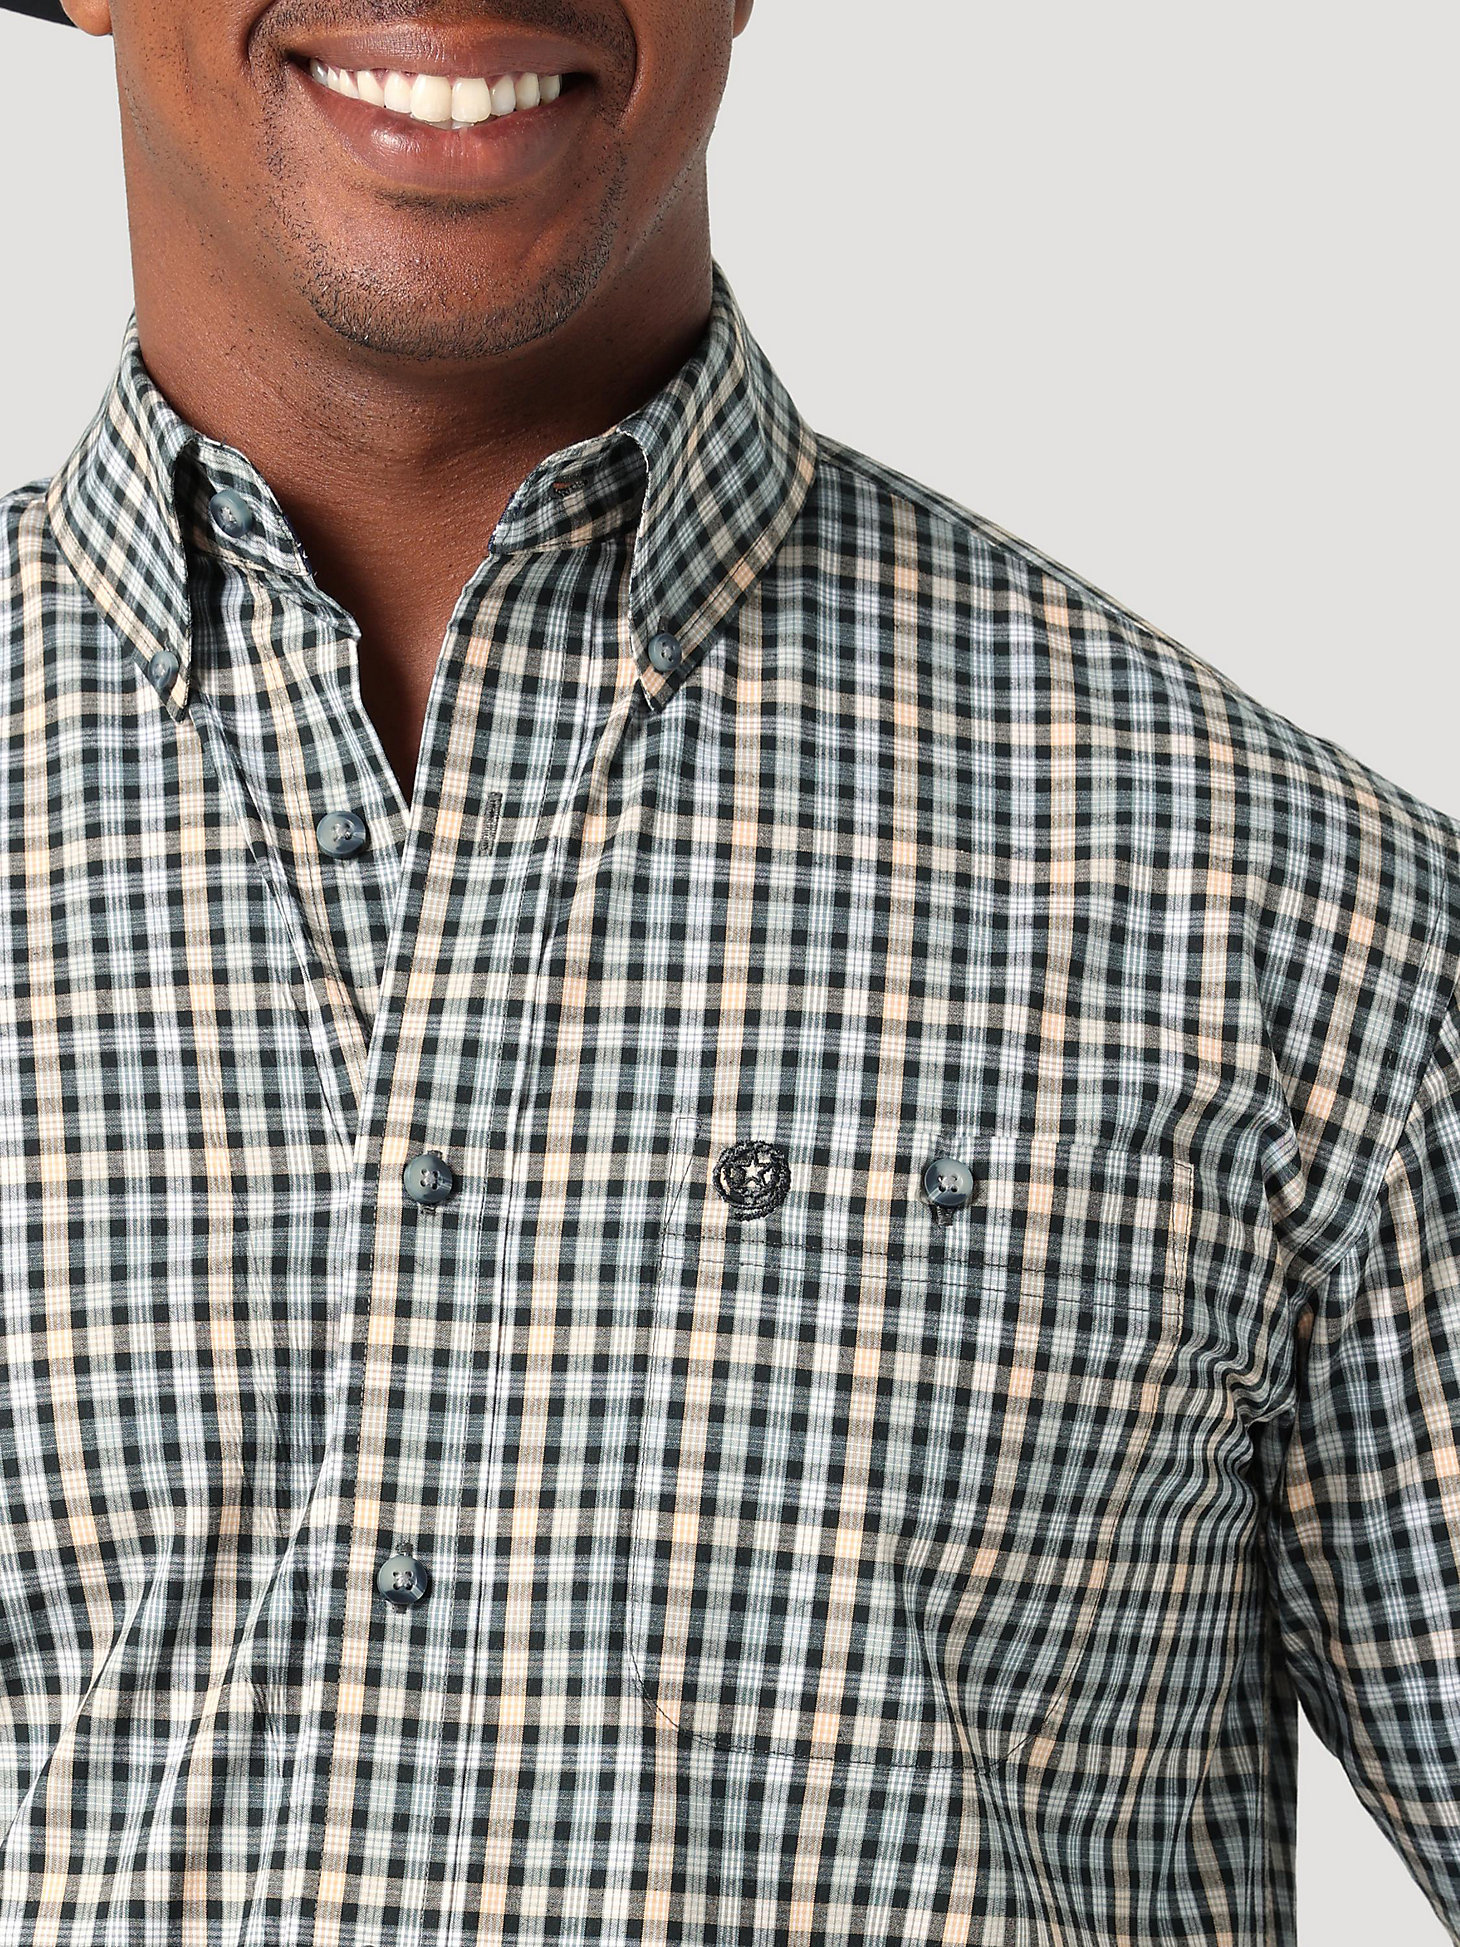 Men's George Strait Long Sleeve Button Down Two Pocket Plaid Shirt in Navy Sea alternative view 2